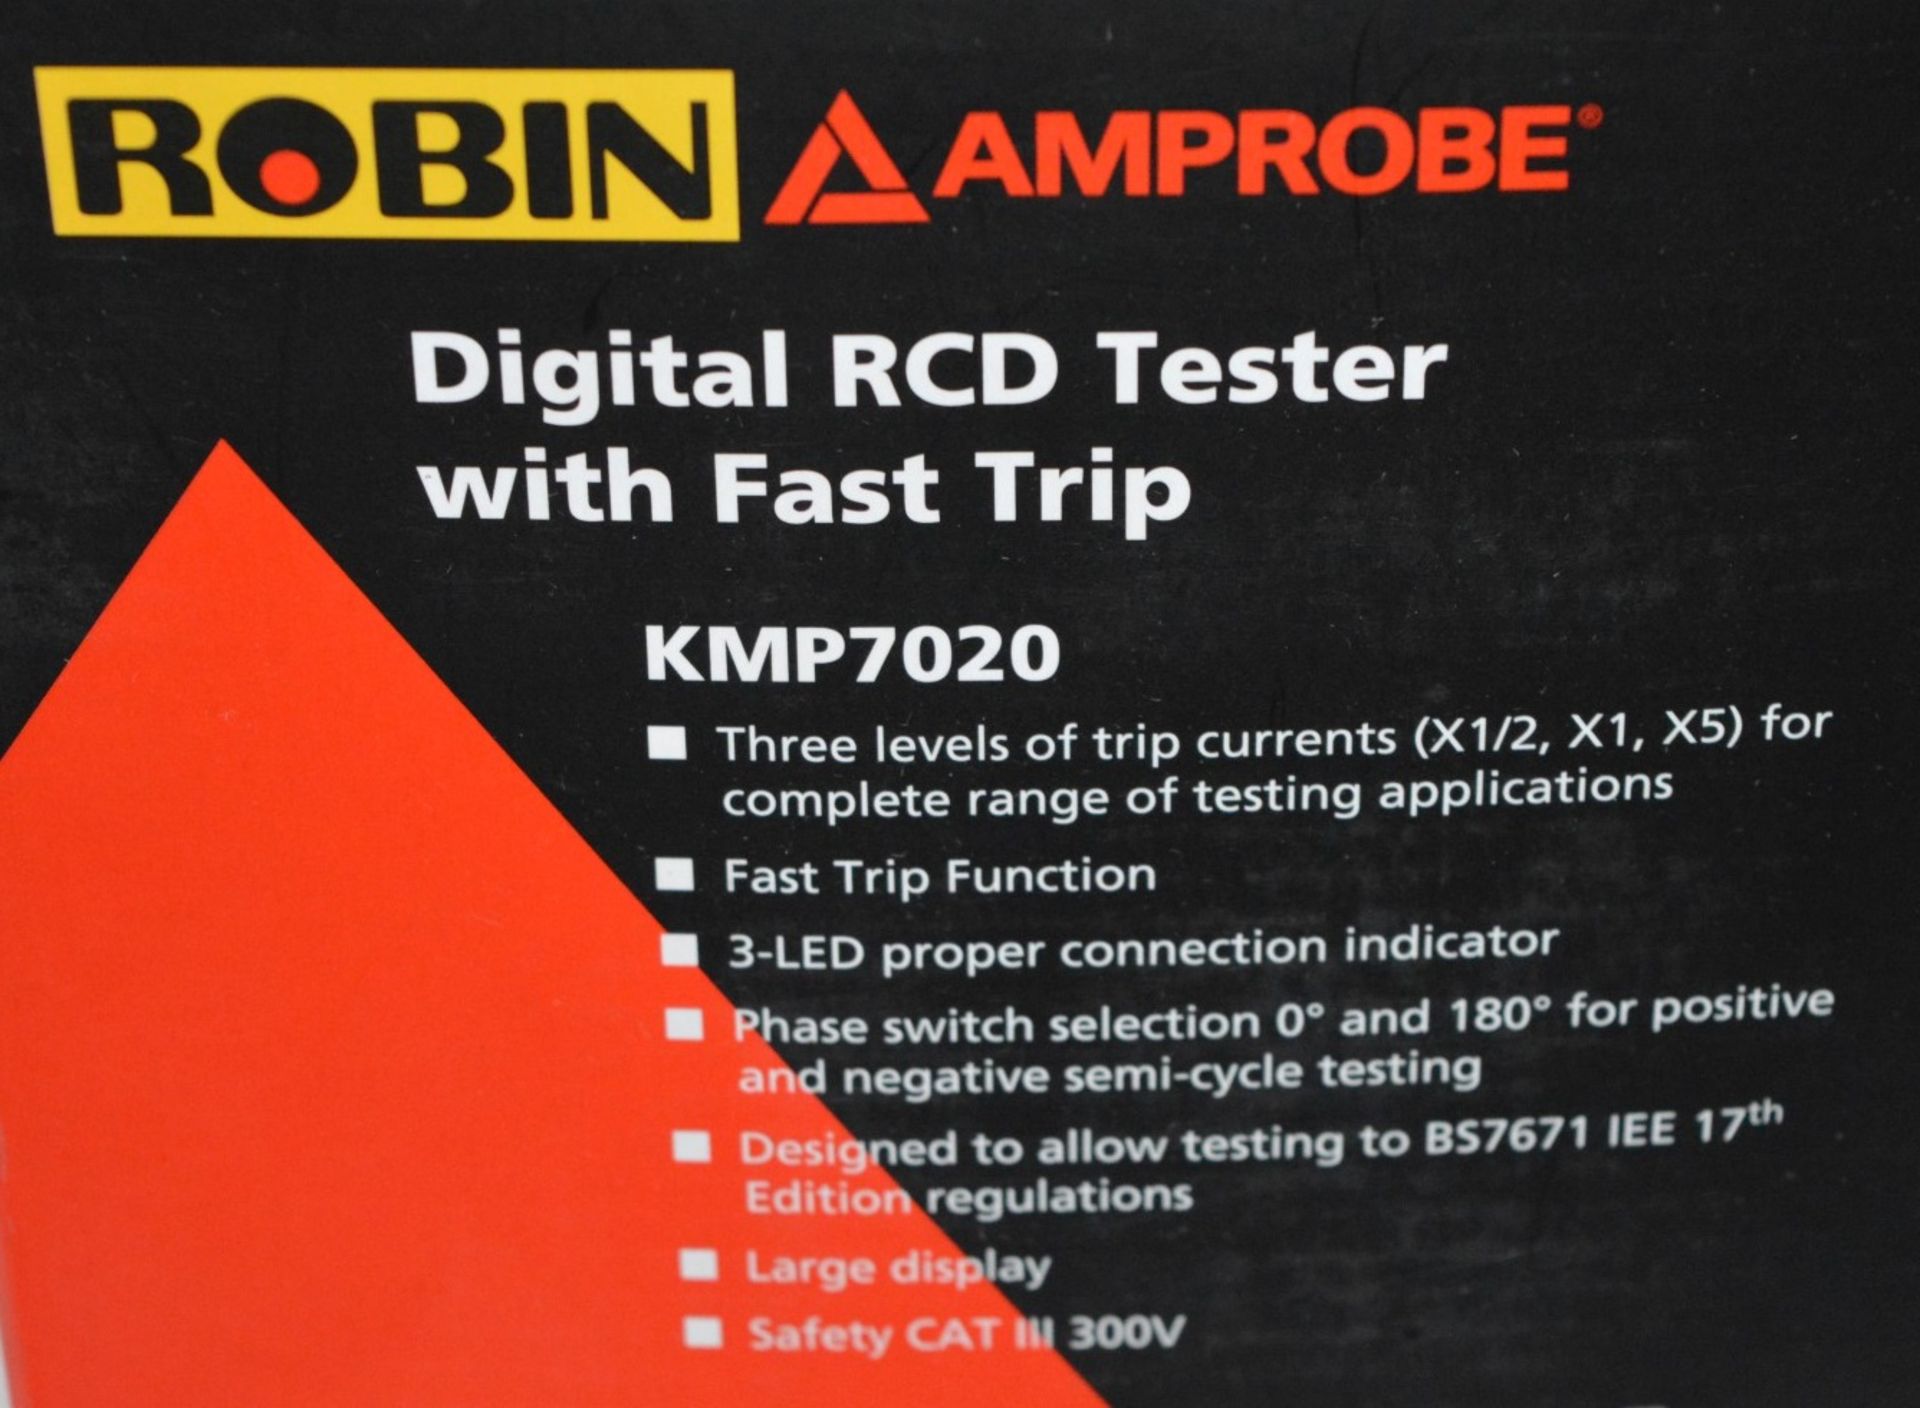 1 x Robin Amprobe Digital RCD Tester Wth Fast Trip - Model KMP7020 - Boxed With All Accessories - - Image 9 of 12